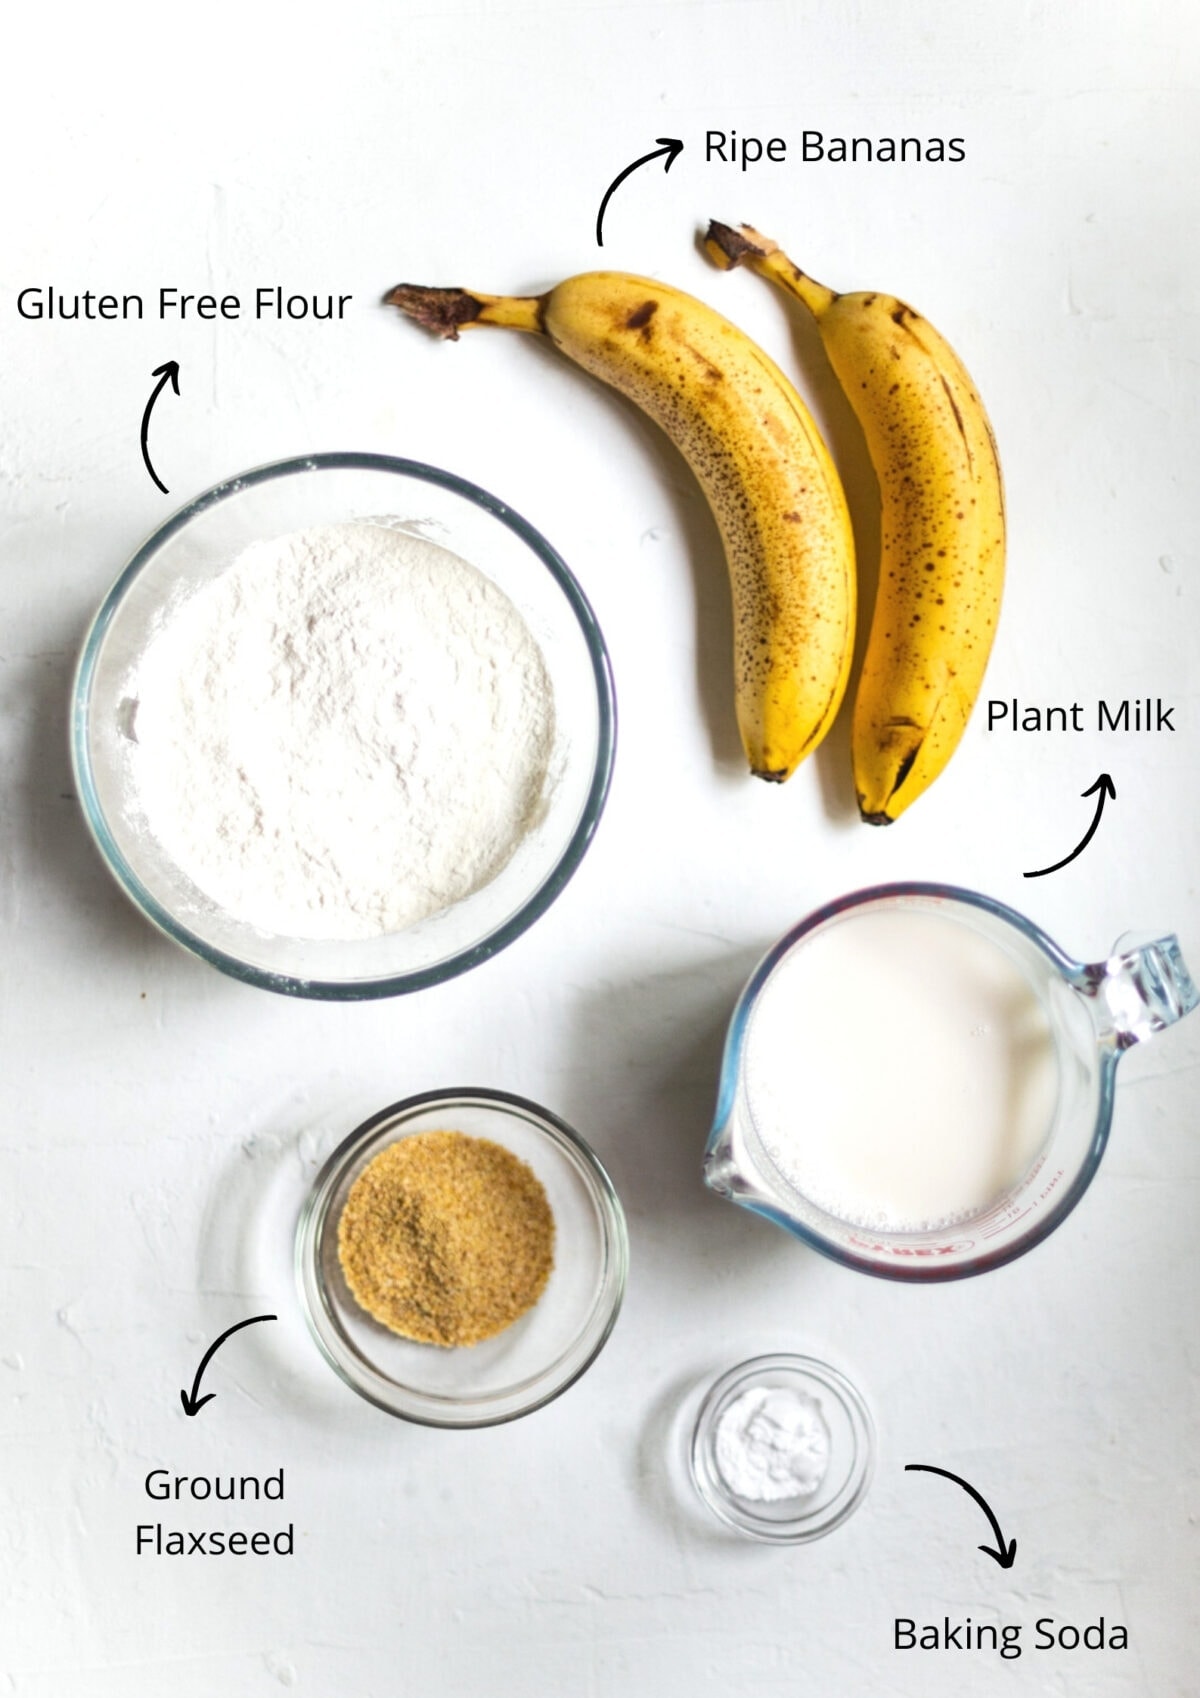 Overhead view of the banana pancake ingredients on a white background, and labelled.